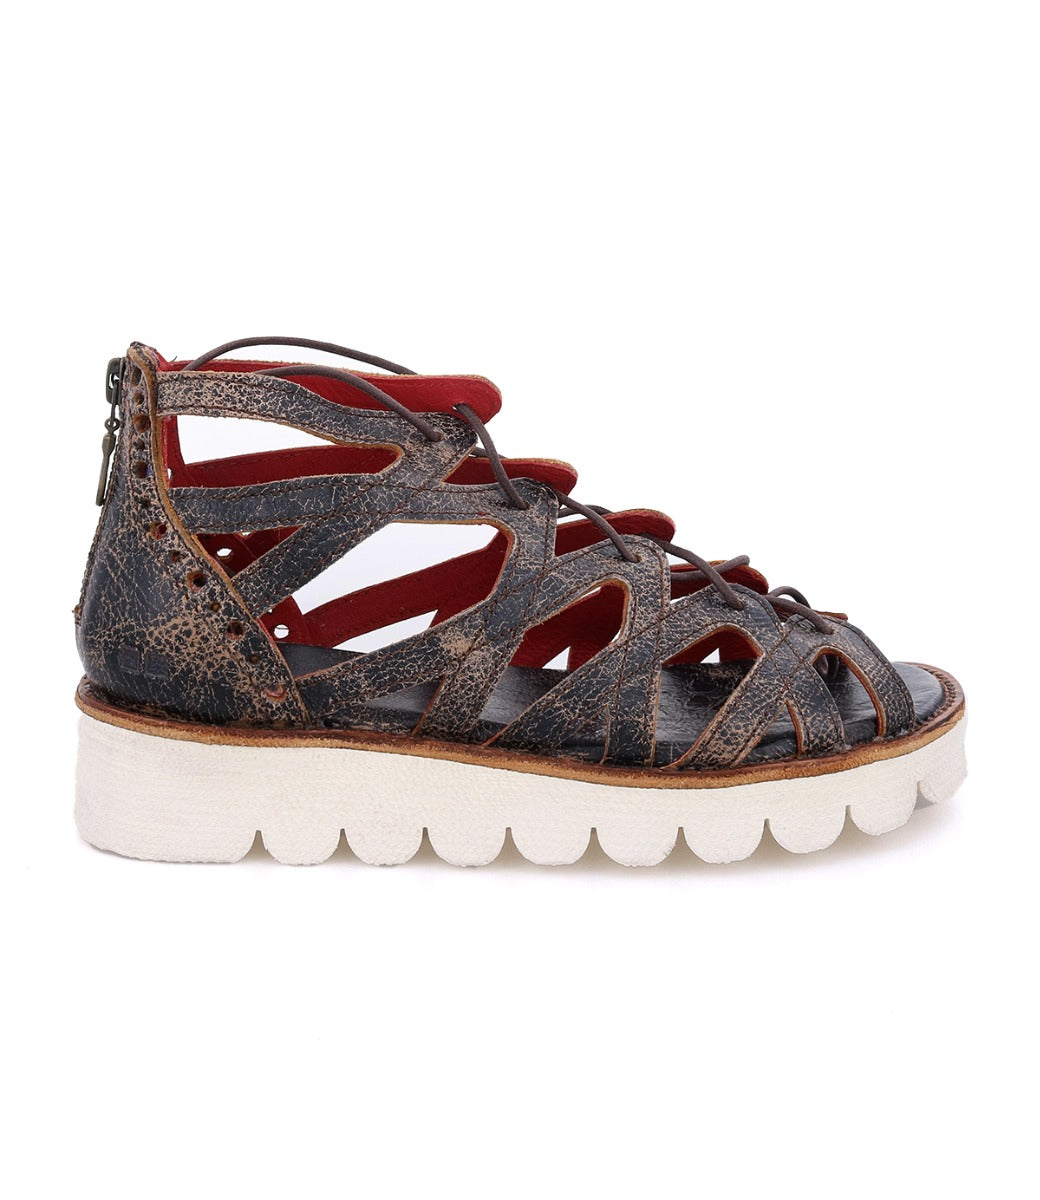 A pair of Bed Stu Shirin II women's brown sandals with a red sole.